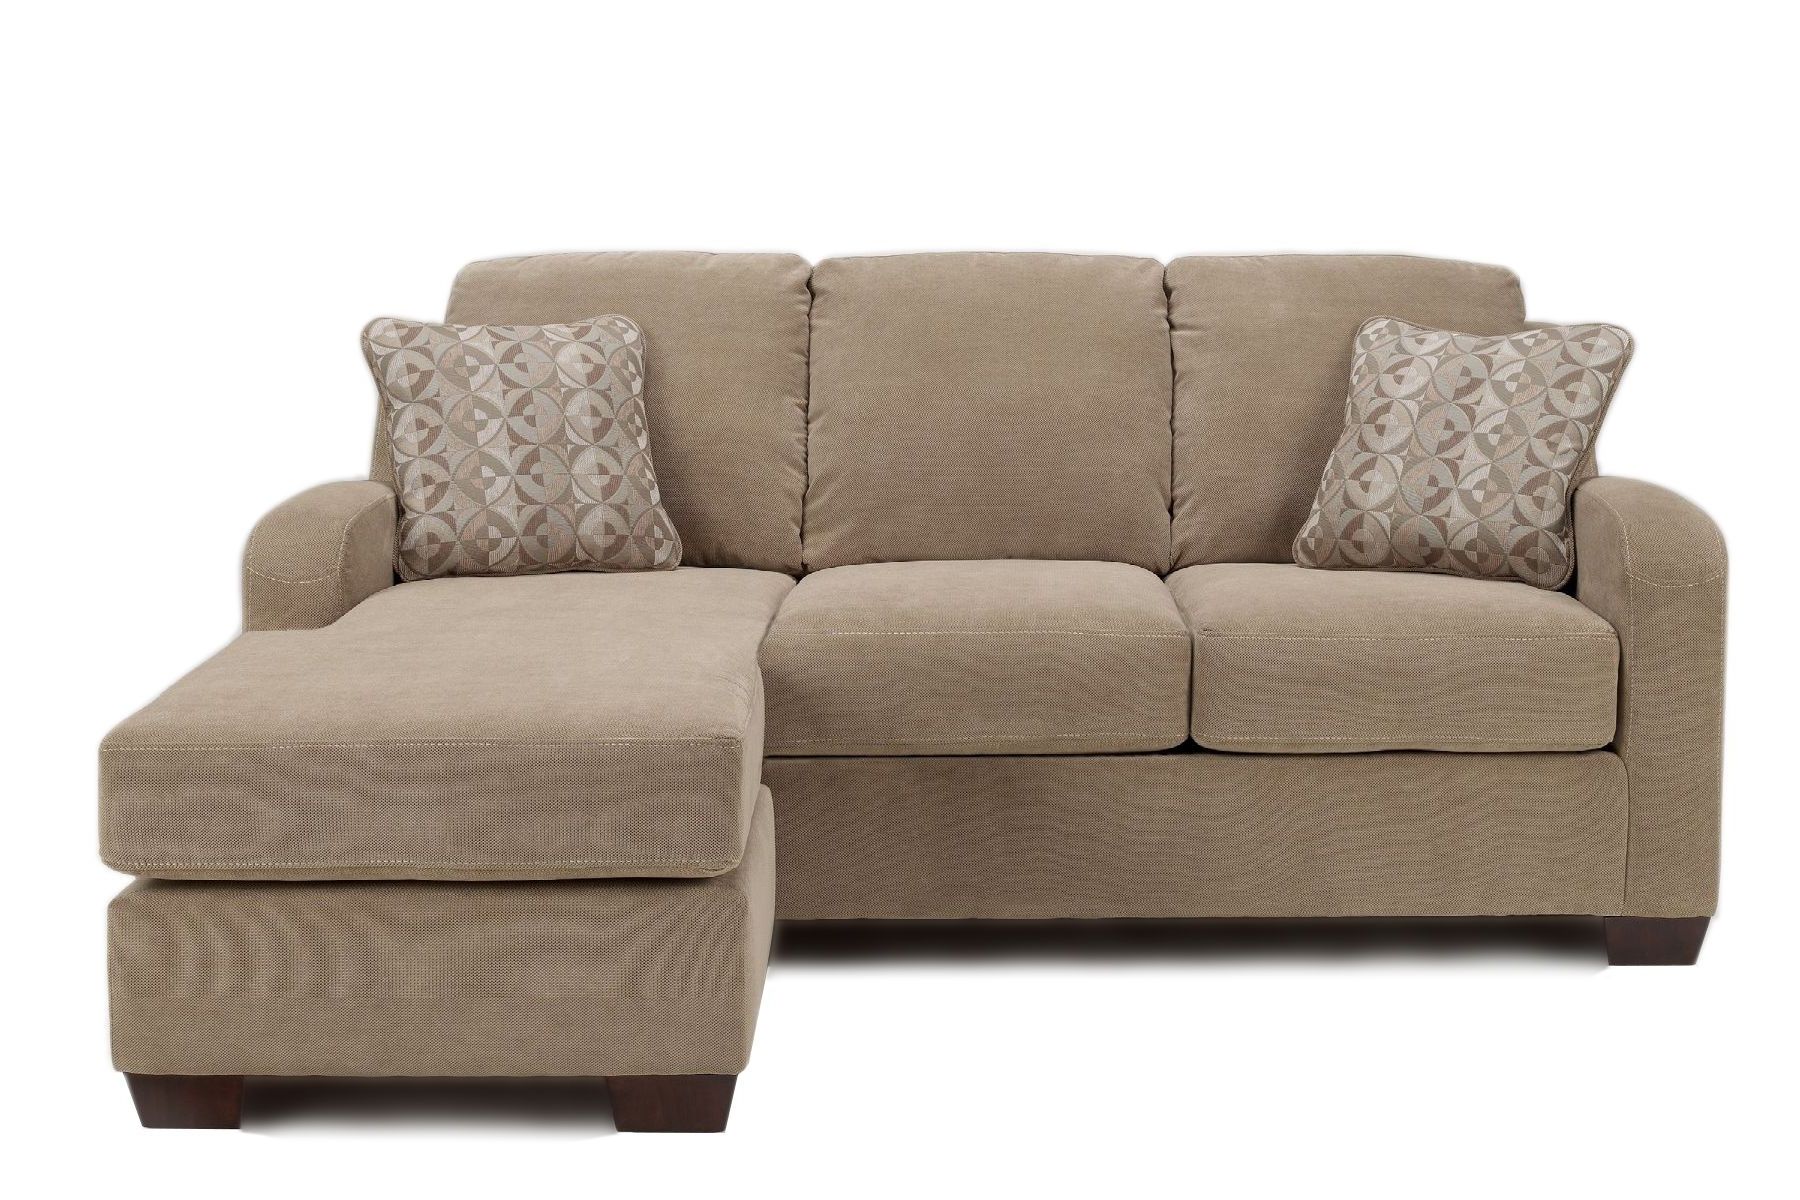 Armchair : Chaise Lounge Sleeper Sofa Convertible Sofa‚ Futons For Regarding Trendy Chaise Lounge Sleepers (View 6 of 15)